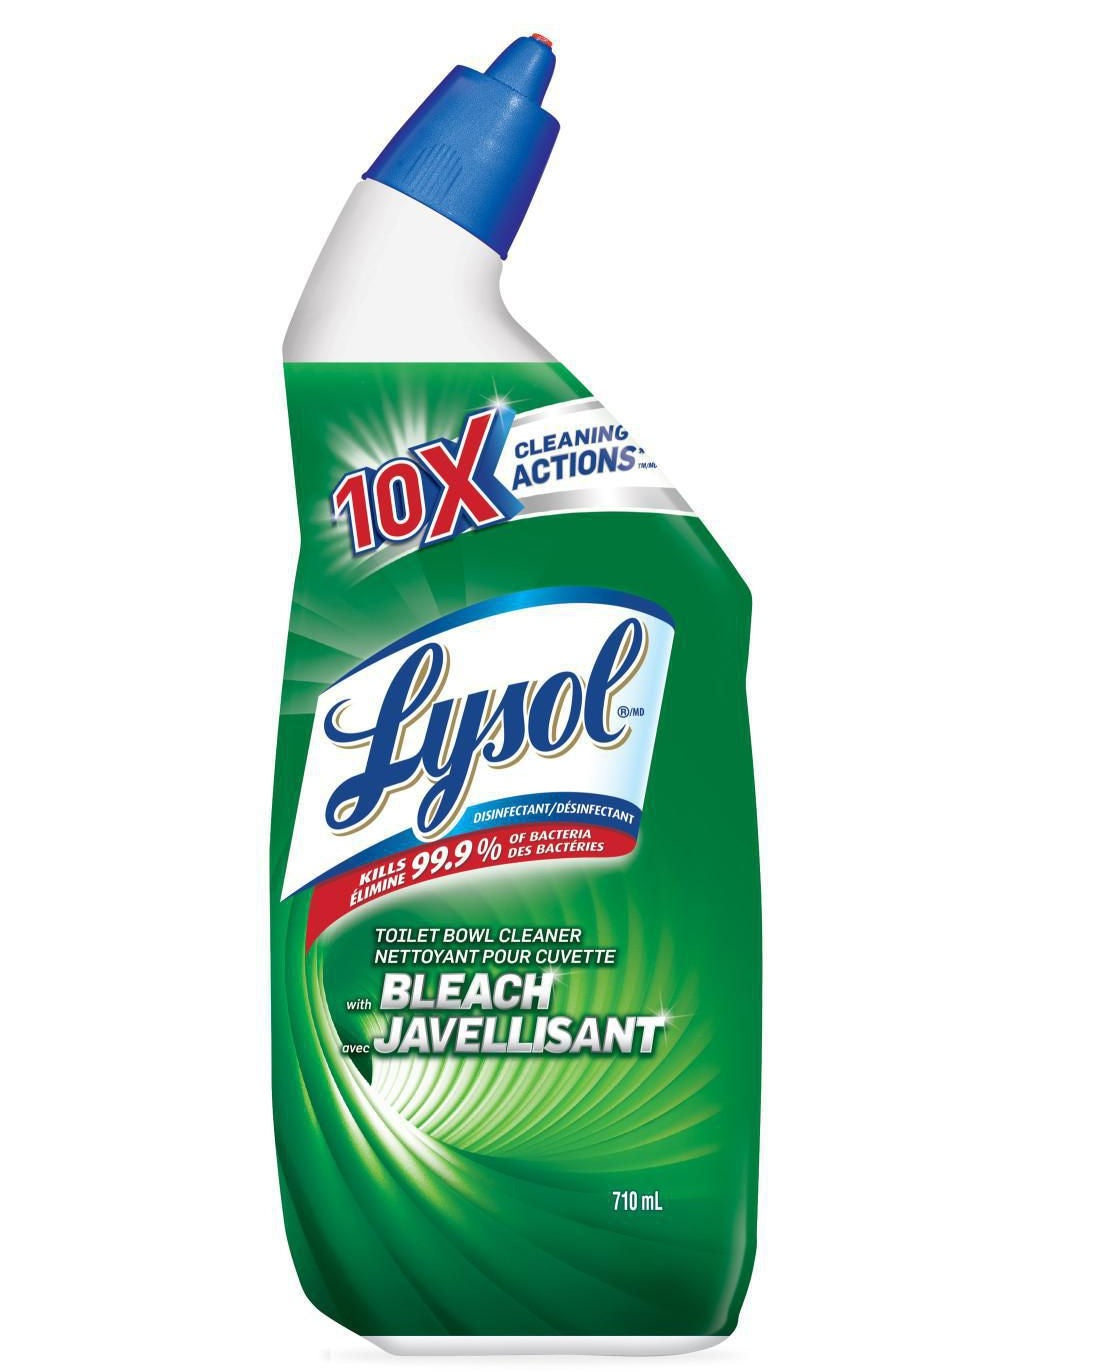 Lysol Toilet Bowl Cleaner with Bleach - 710 ml - Case of 9